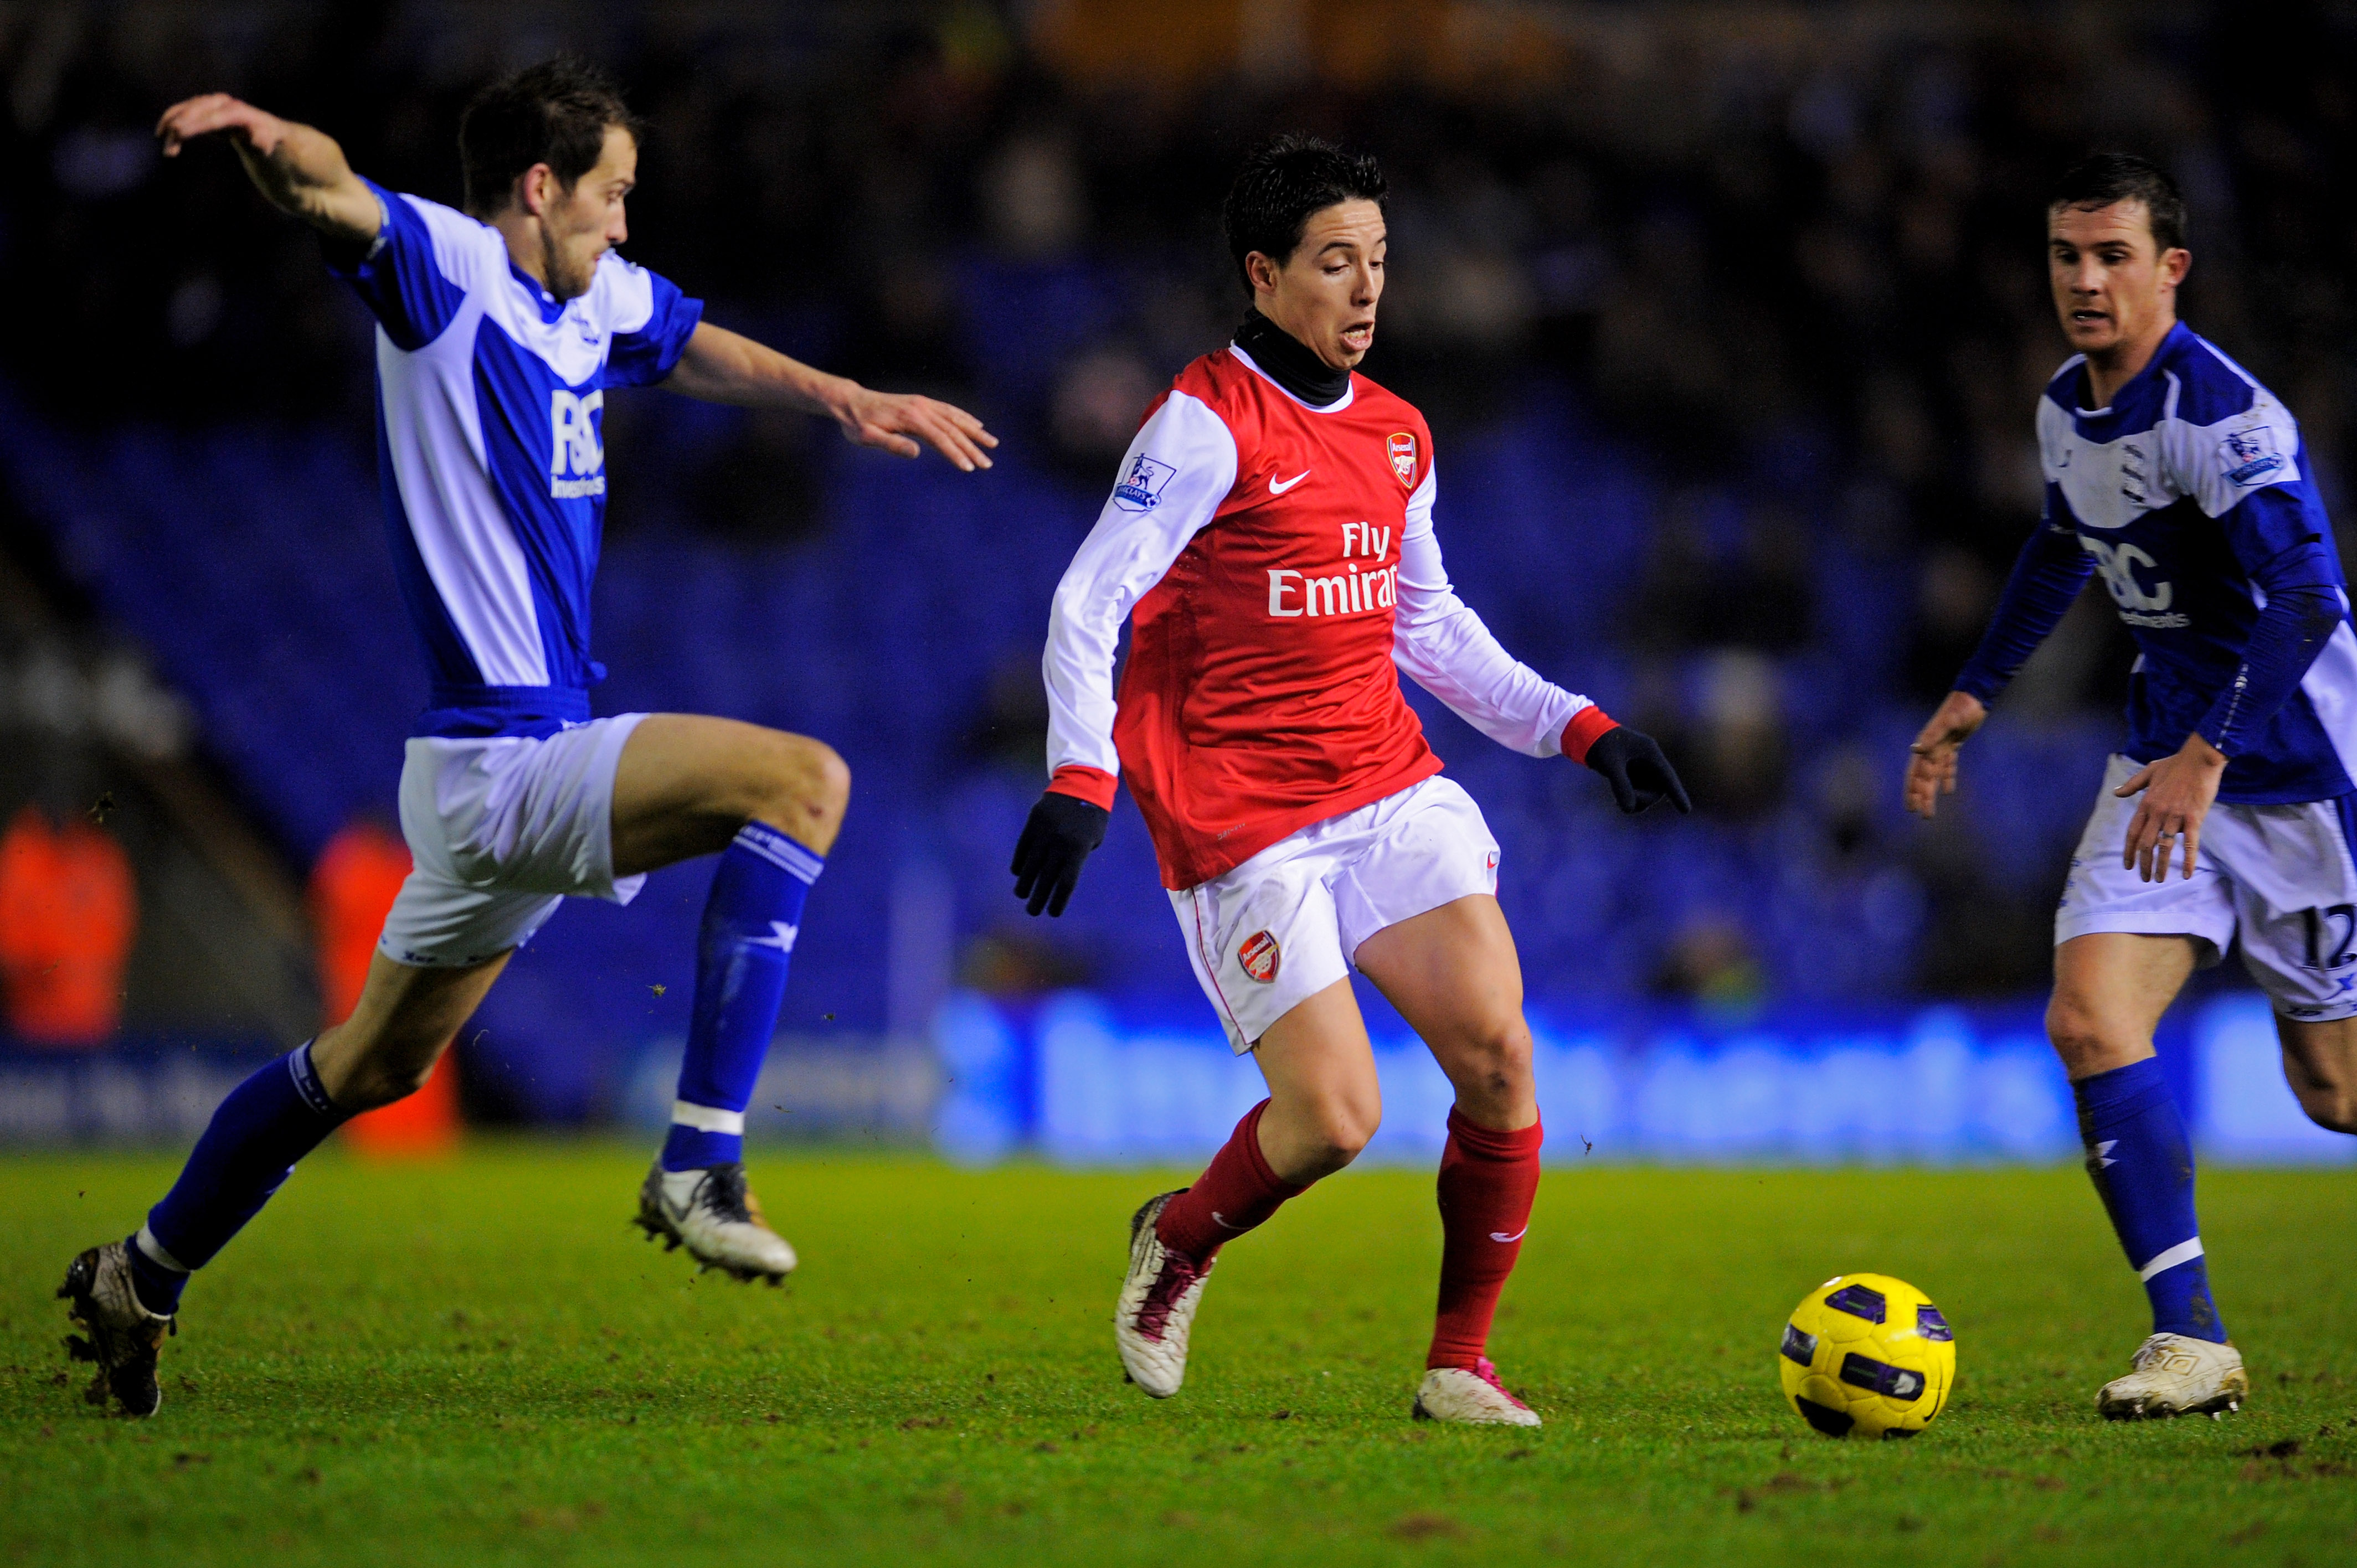 BIRMINGHAM, ENGLAND - JANUARY 01:  Samir Nasri of Arsenal is challenged by Roger Johnson of Birmingham during the Barclays Premier Leaue match between Birmingham City and Arsenal at St. Andrews on January 1, 2011 in Birmingham, England.  (Photo by Michael